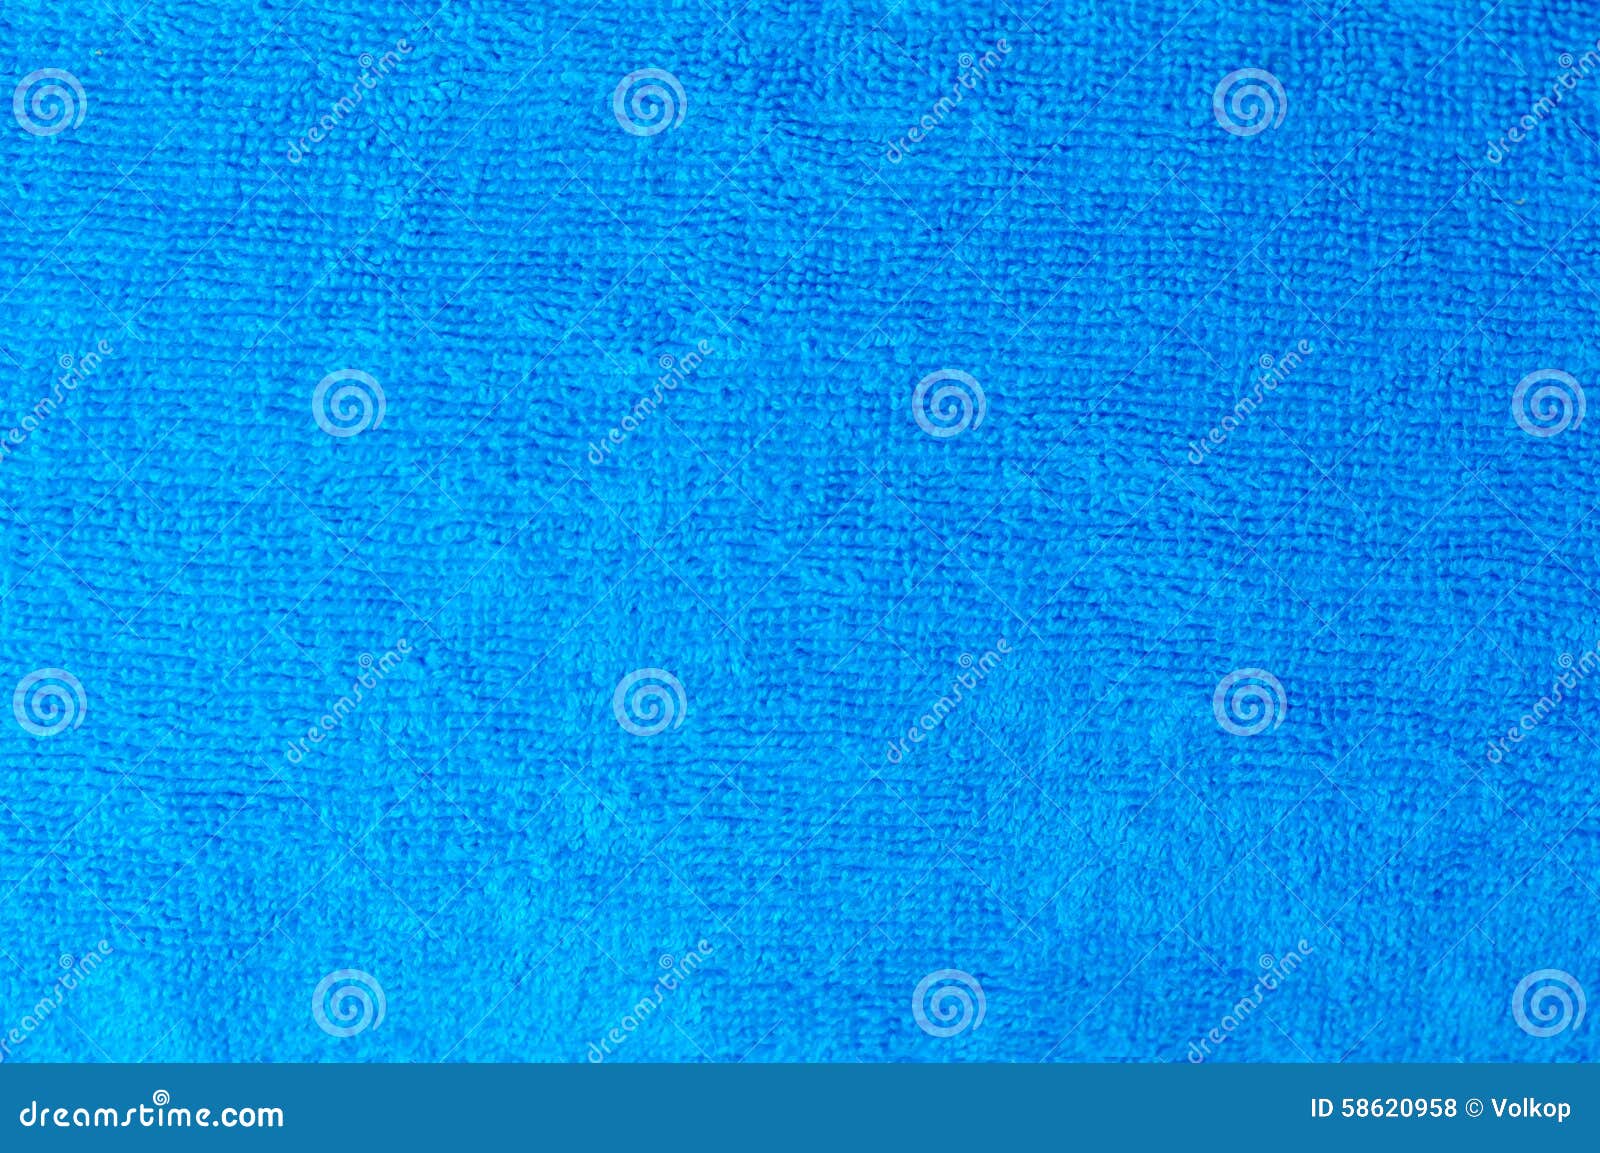 texture of a blue cotton towel as a background